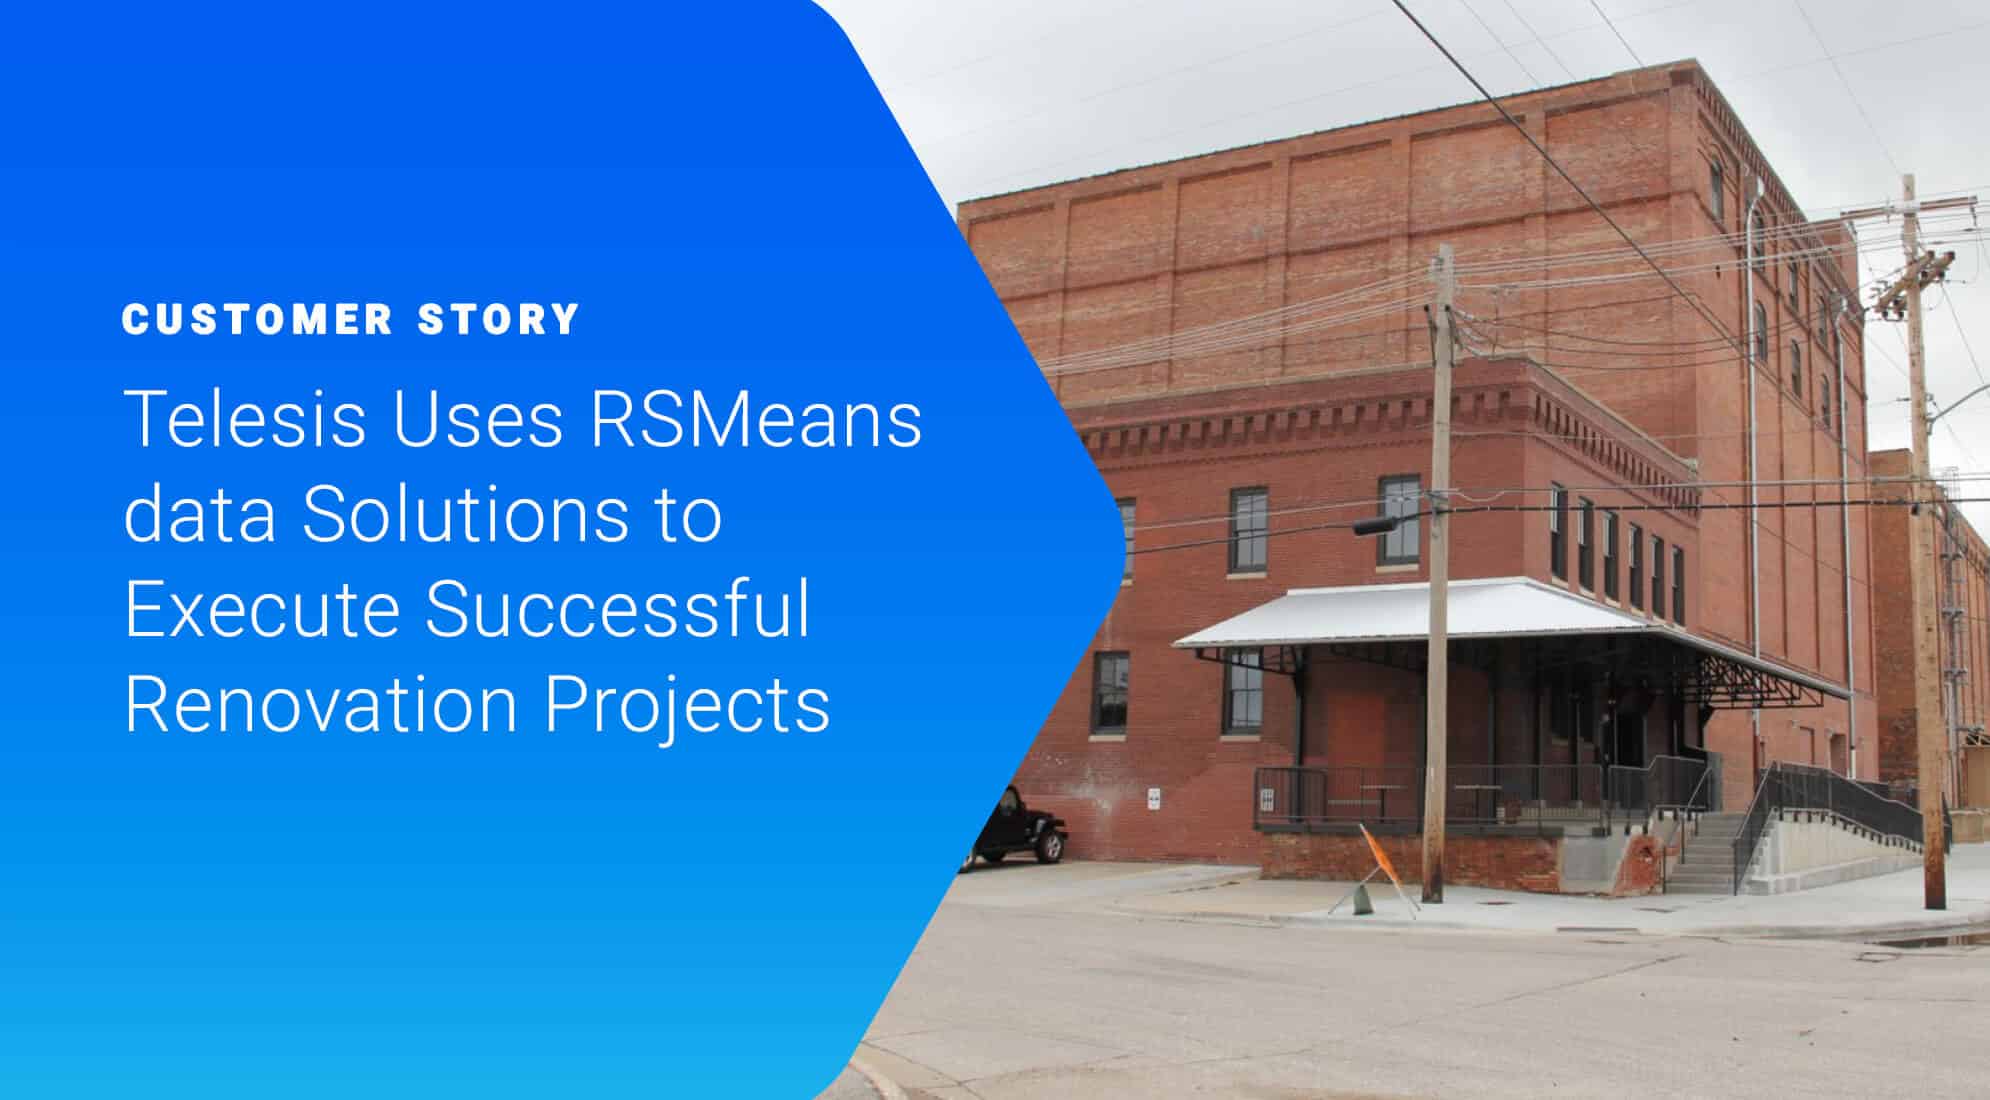 Renovation Projects Made Easier Using RSMeans data 2